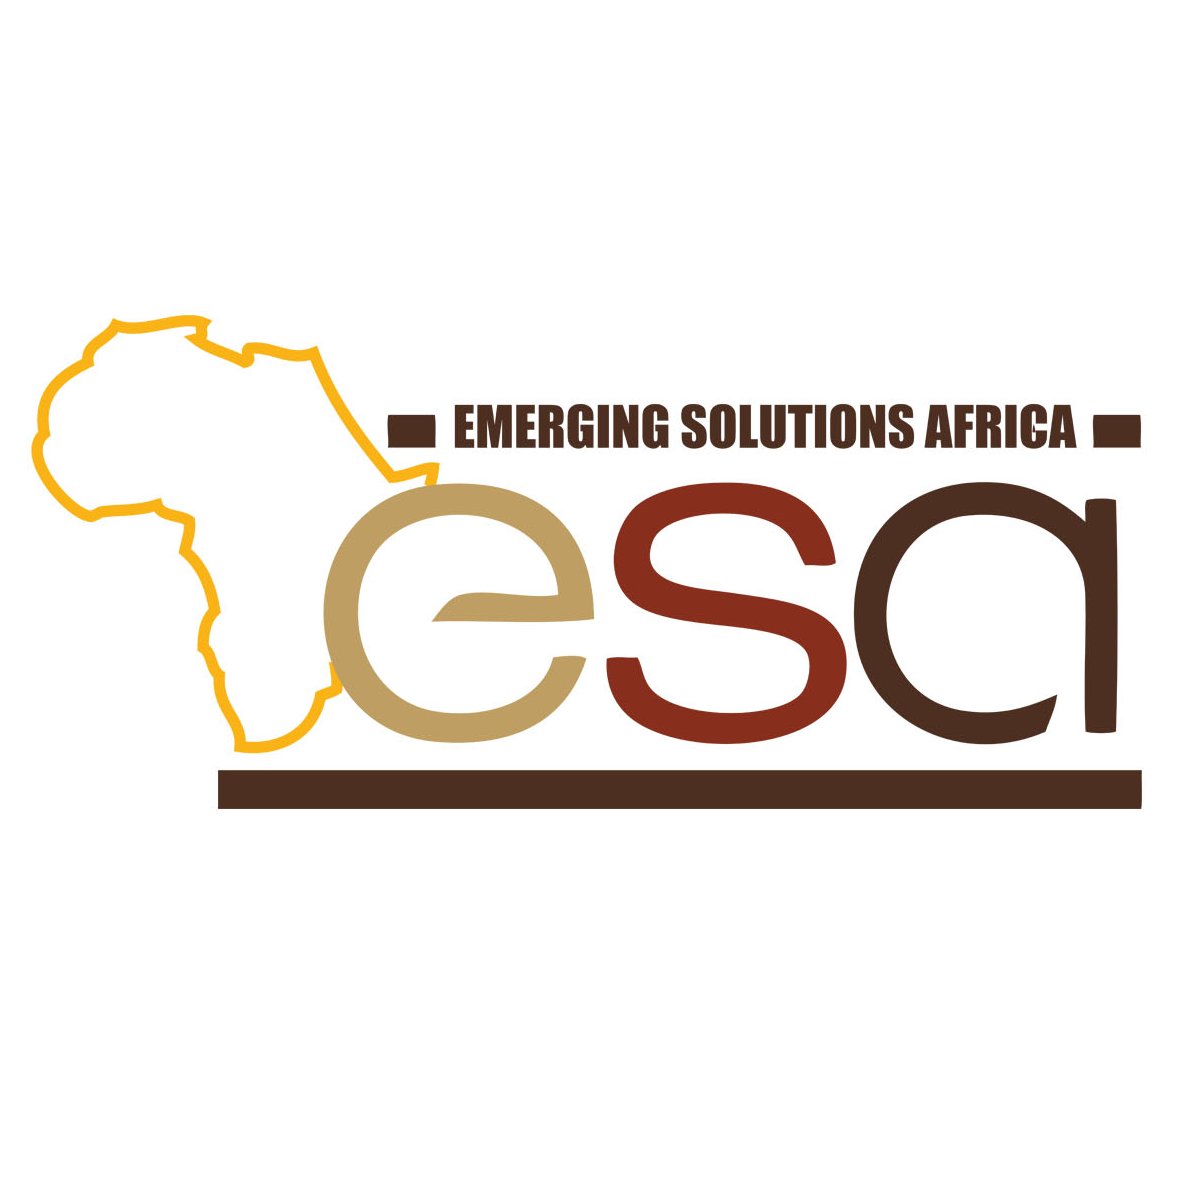 Emerging Solutions Africa